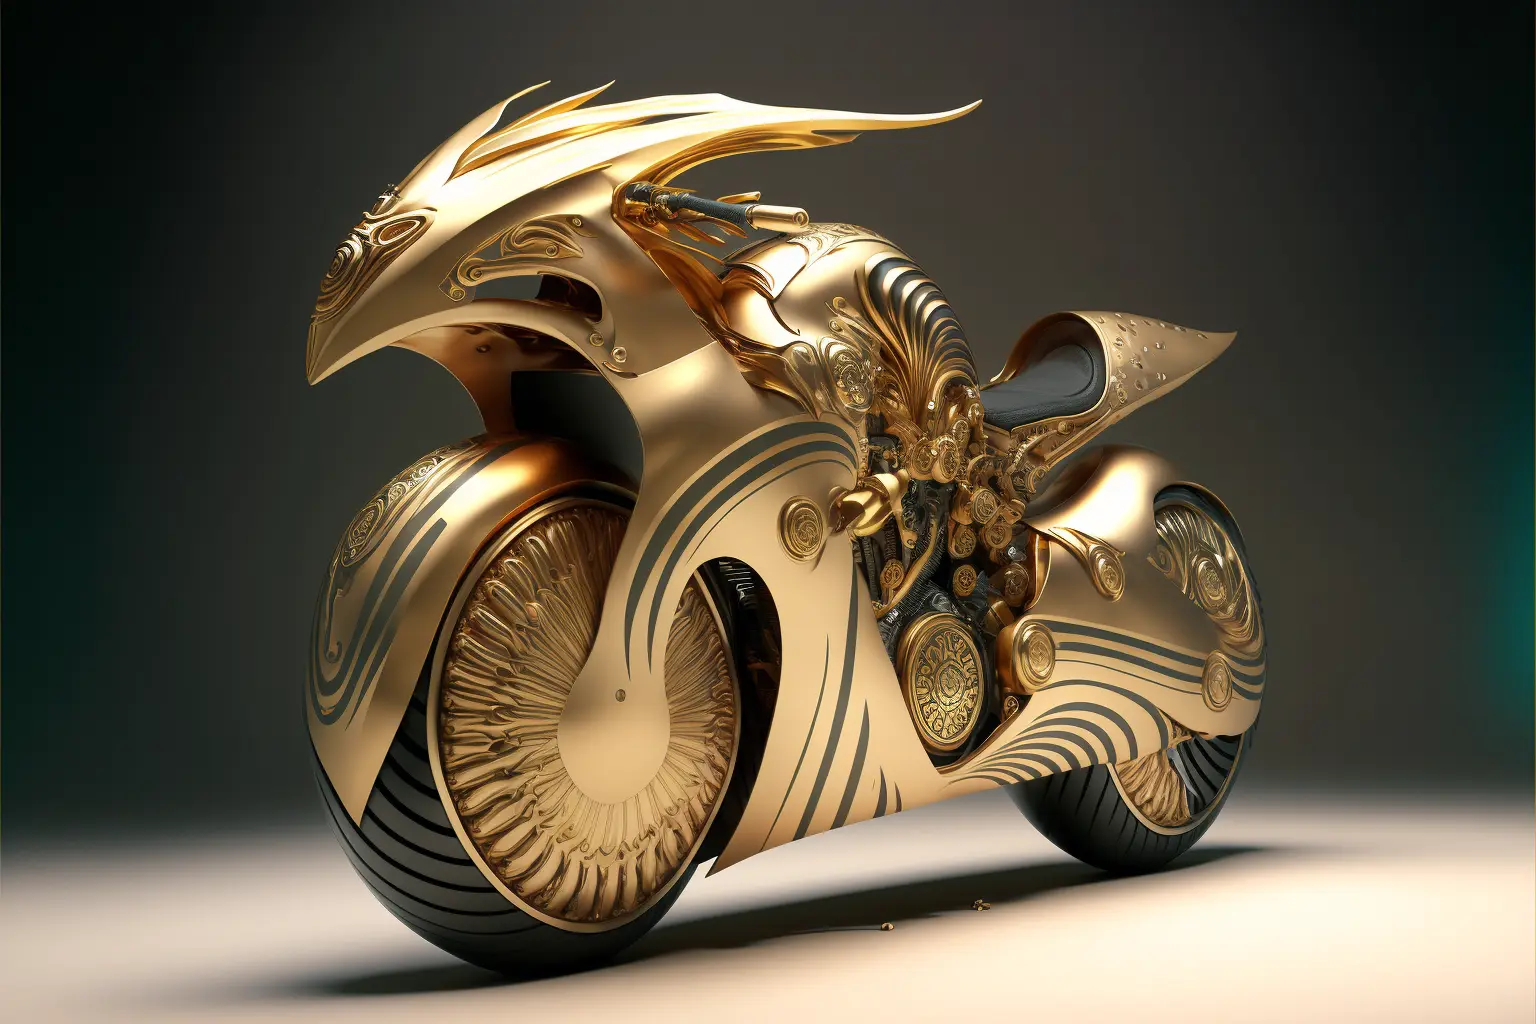 futuristic motorcycle concept inspired by Egyptian mythology